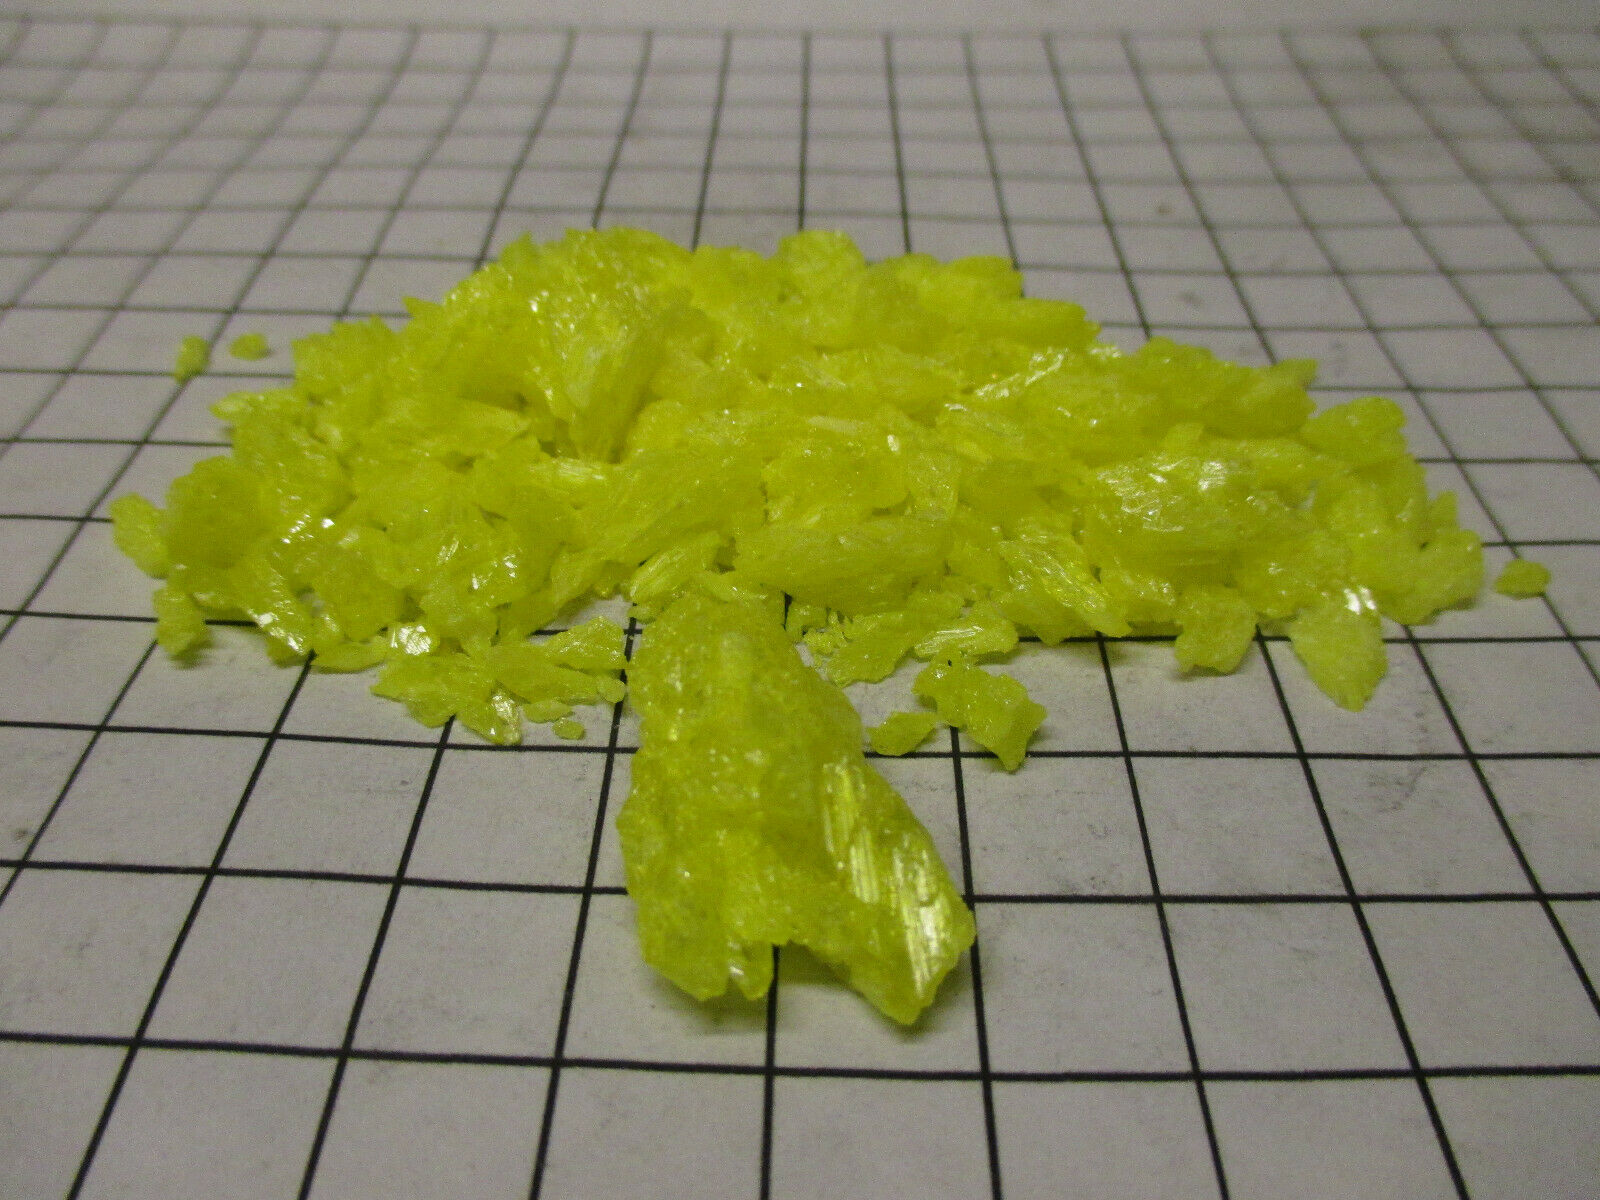 Sulfur Element Sample 20g 99.99%+ Pure Beautiful Shiny Crystals - Periodic Table